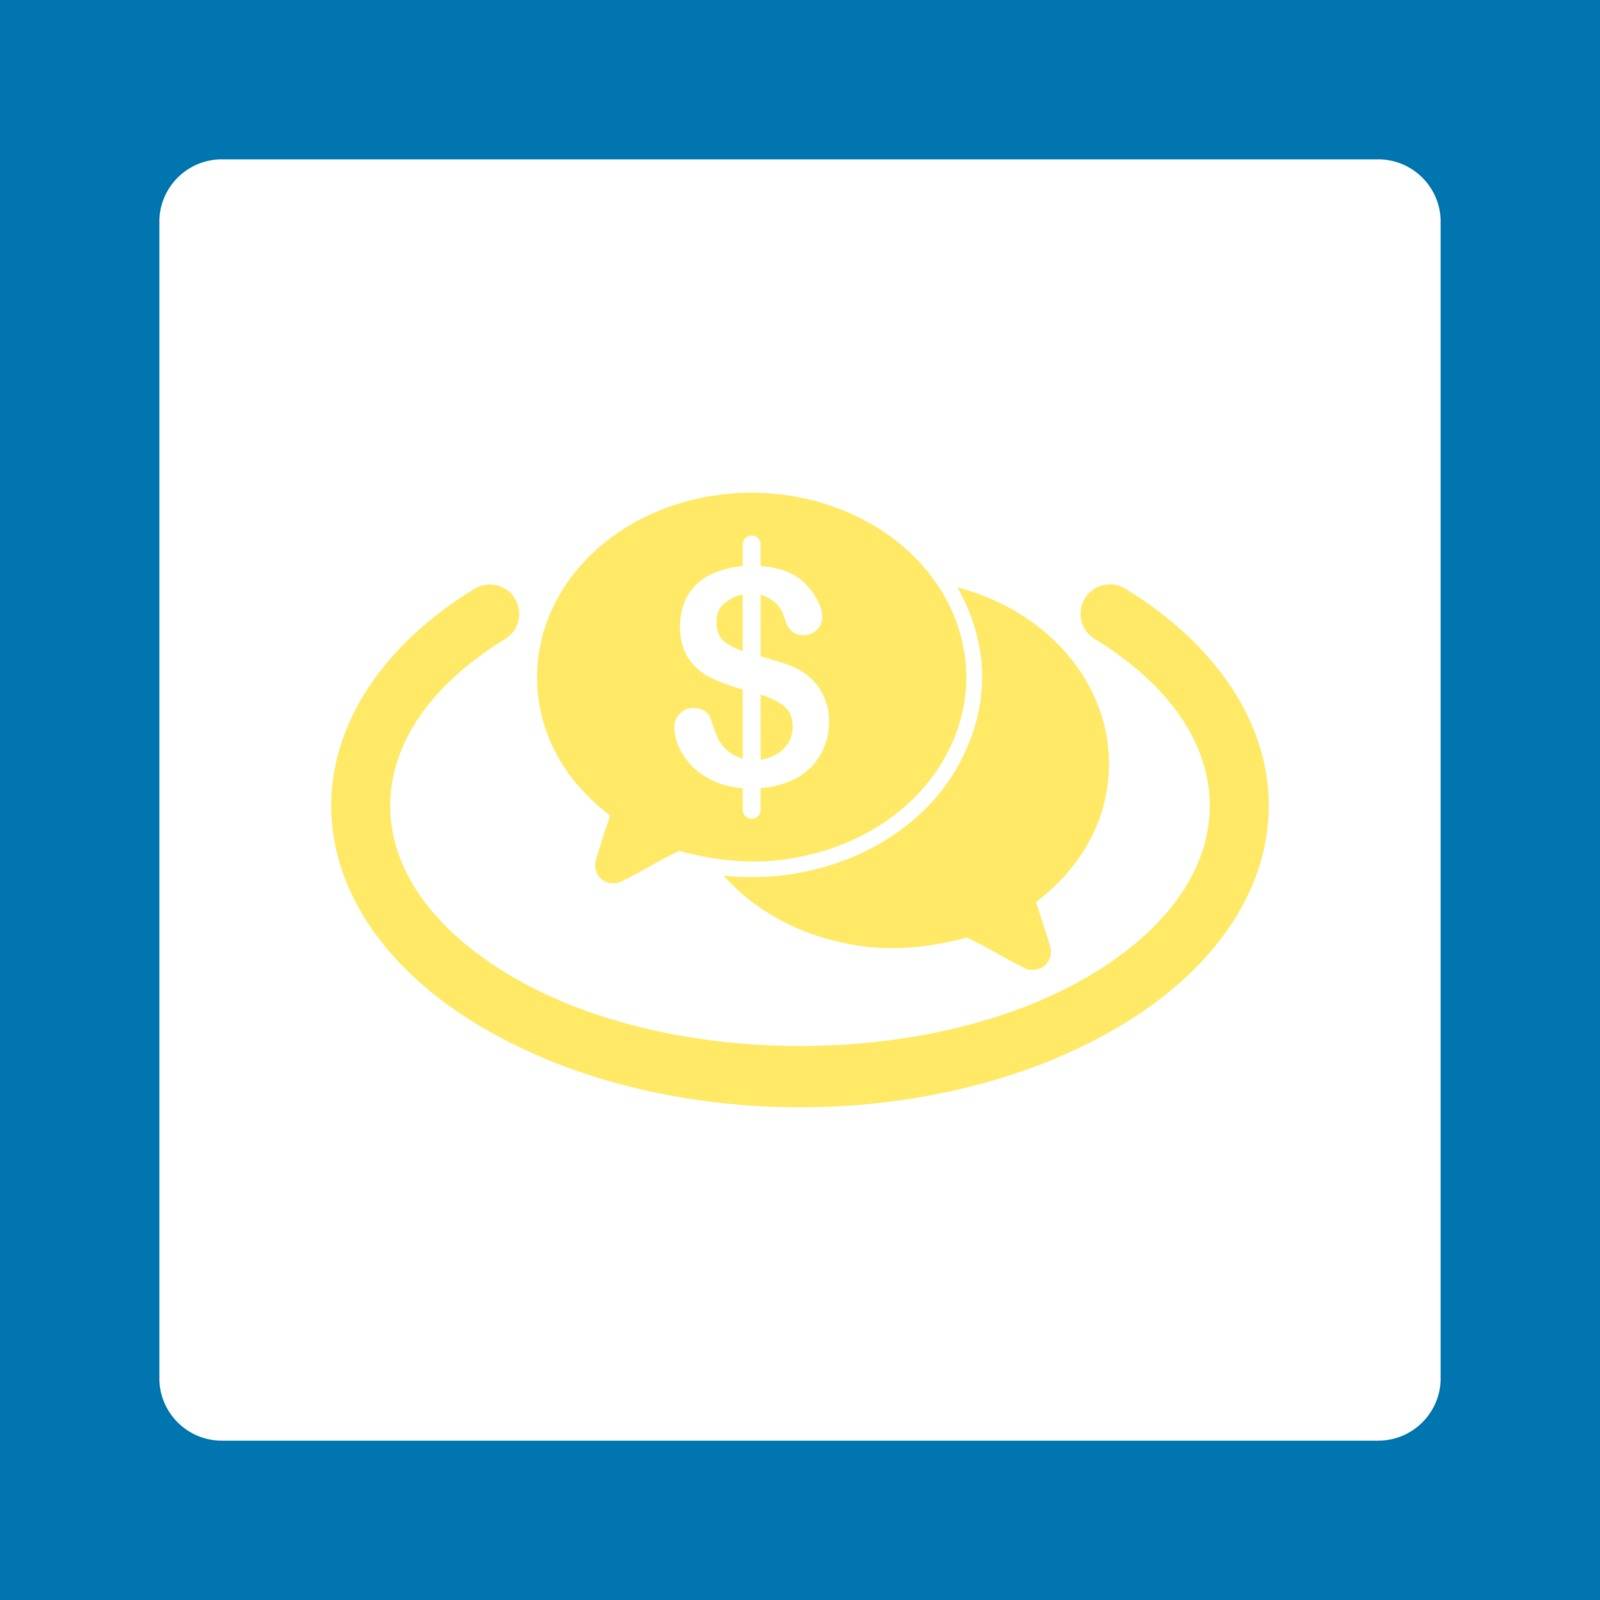 Financial Network icon. This flat rounded square button uses yellow and white colors and isolated on a blue background.